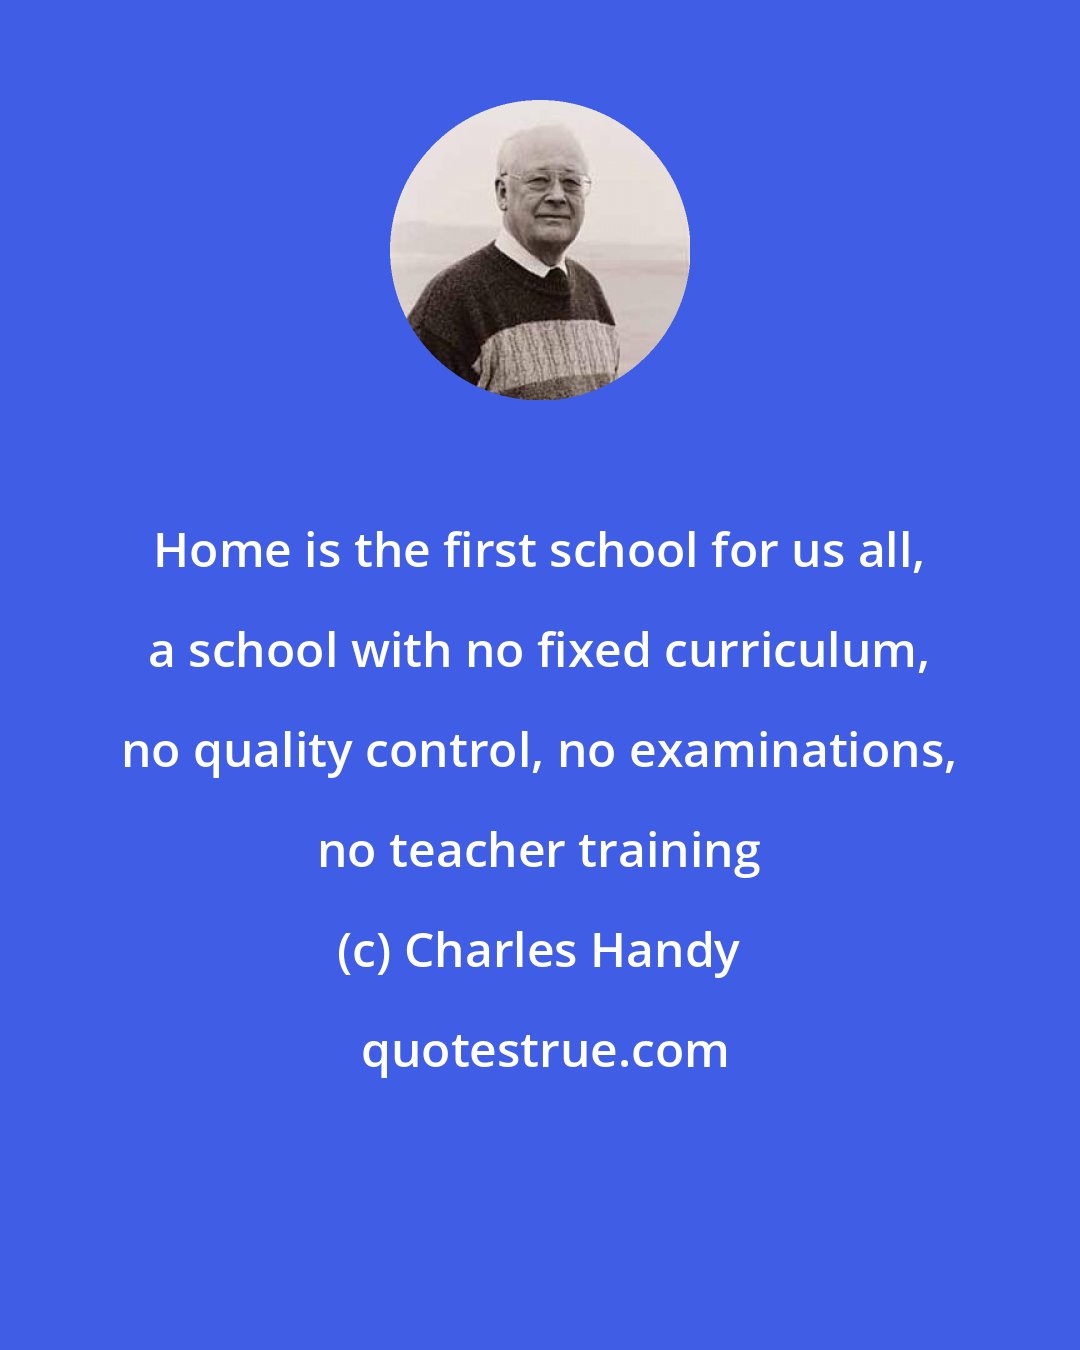 Charles Handy: Home is the first school for us all, a school with no fixed curriculum, no quality control, no examinations, no teacher training